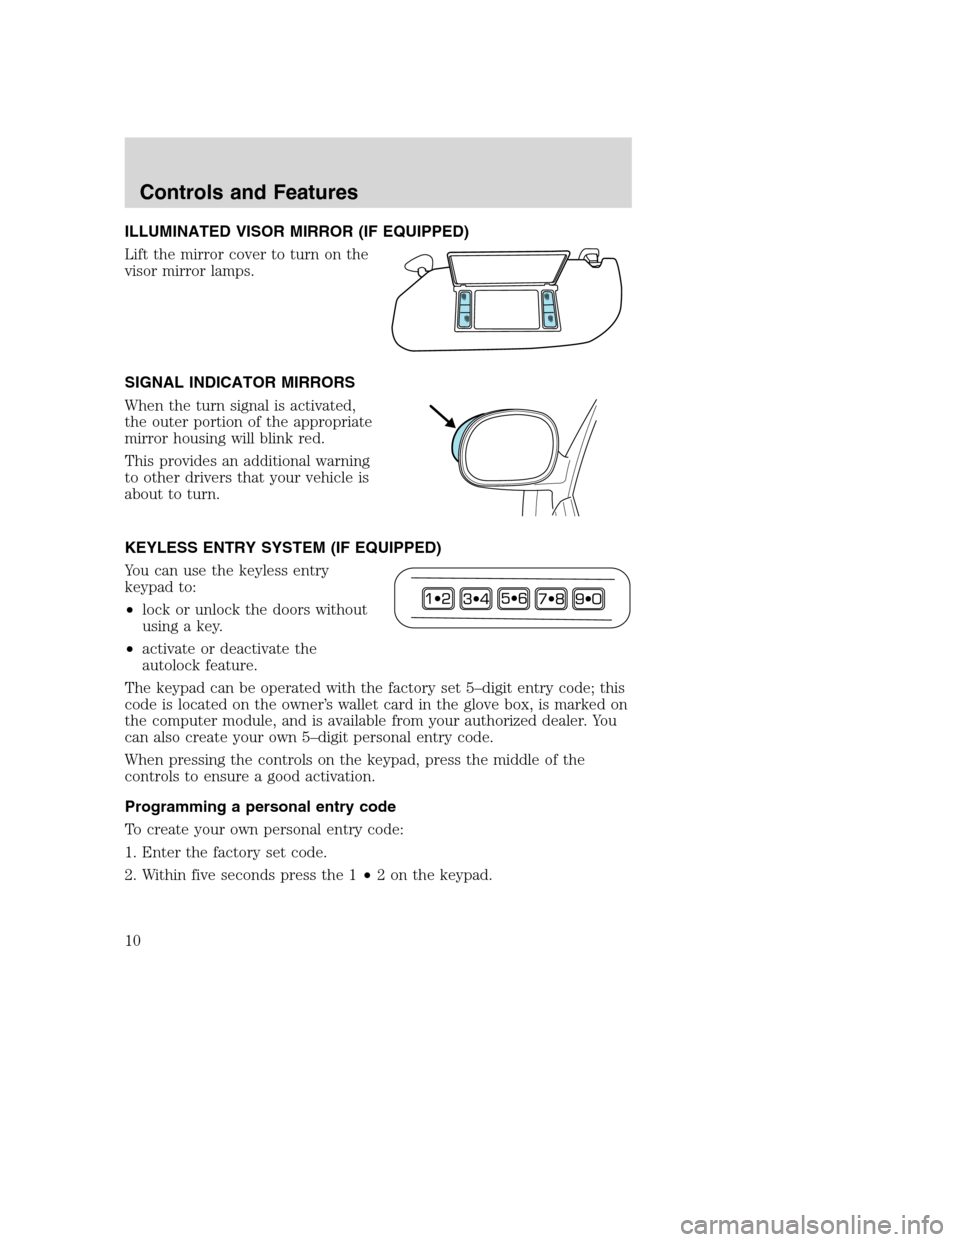 FORD F150 2004 11.G Raptor Supplement Manual ILLUMINATED VISOR MIRROR (IF EQUIPPED)
Lift the mirror cover to turn on the
visor mirror lamps.
SIGNAL INDICATOR MIRRORS
When the turn signal is activated,
the outer portion of the appropriate
mirror 